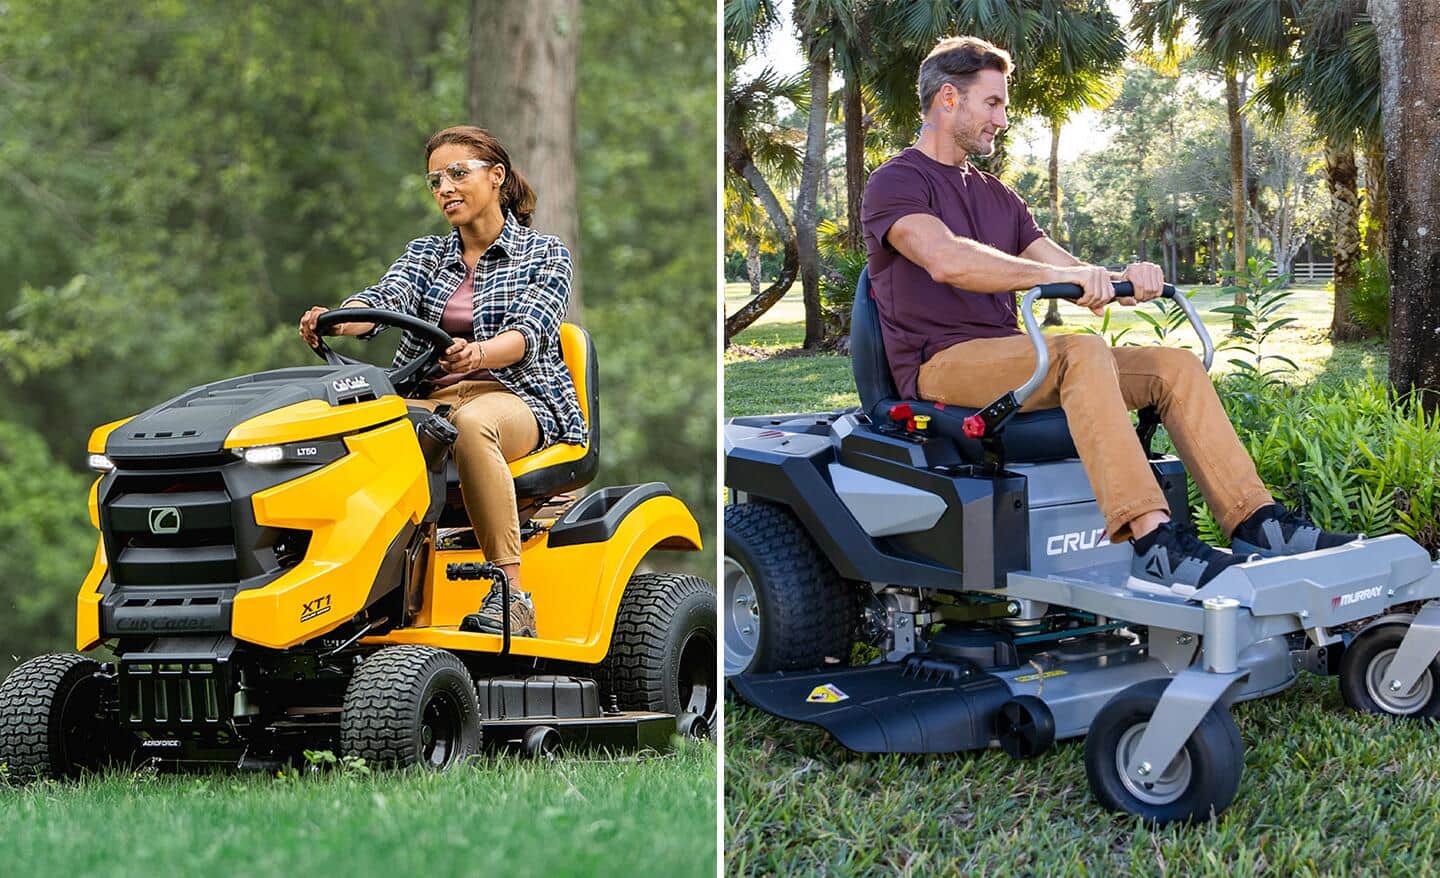 A split screen image of a person riding an electric lawn mower and another person riding a gas mower.